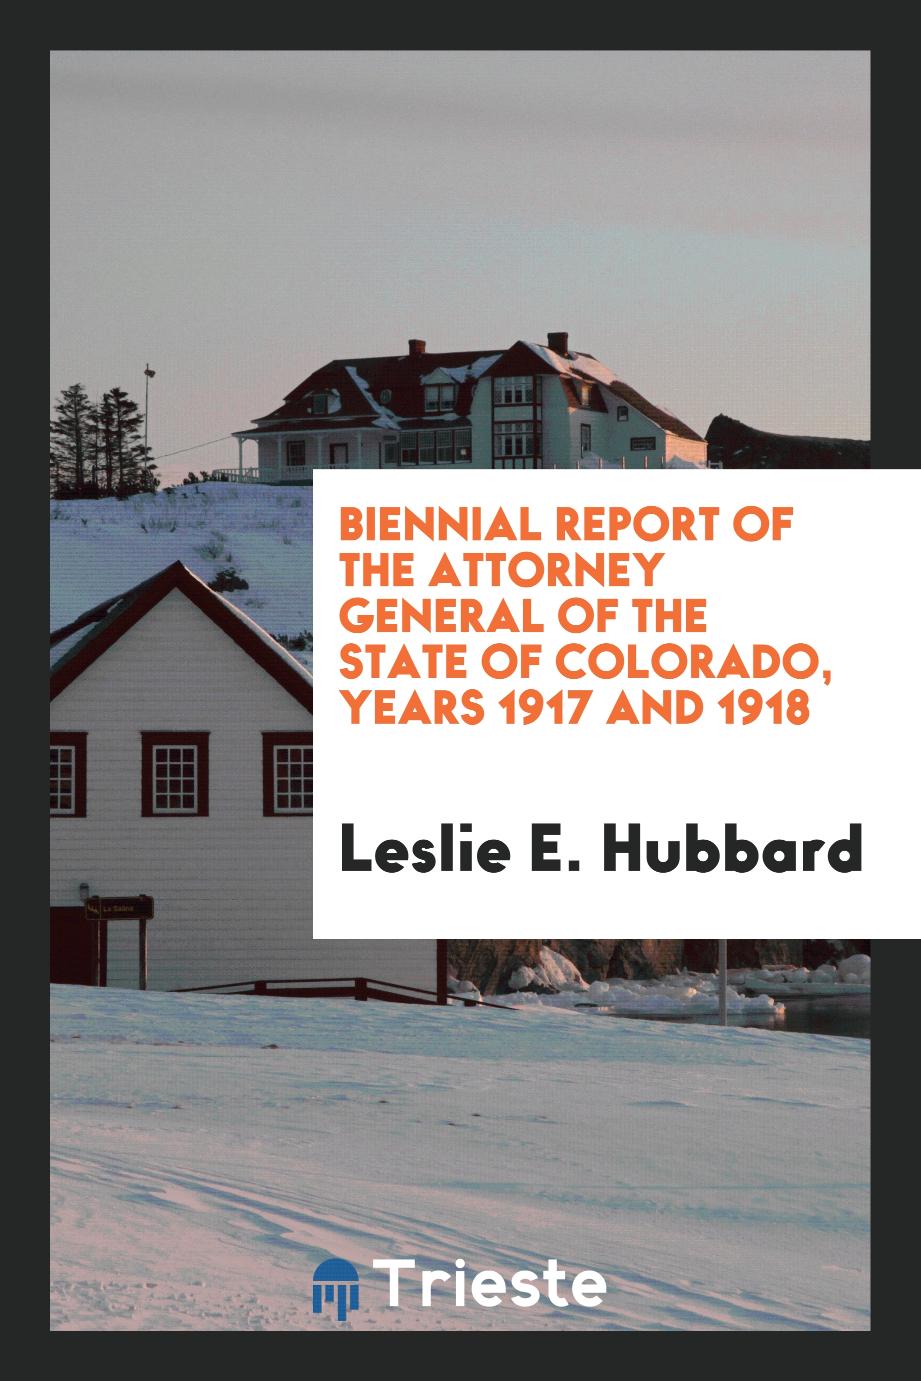 Biennial Report of the Attorney General of the State of Colorado, Years 1917 and 1918